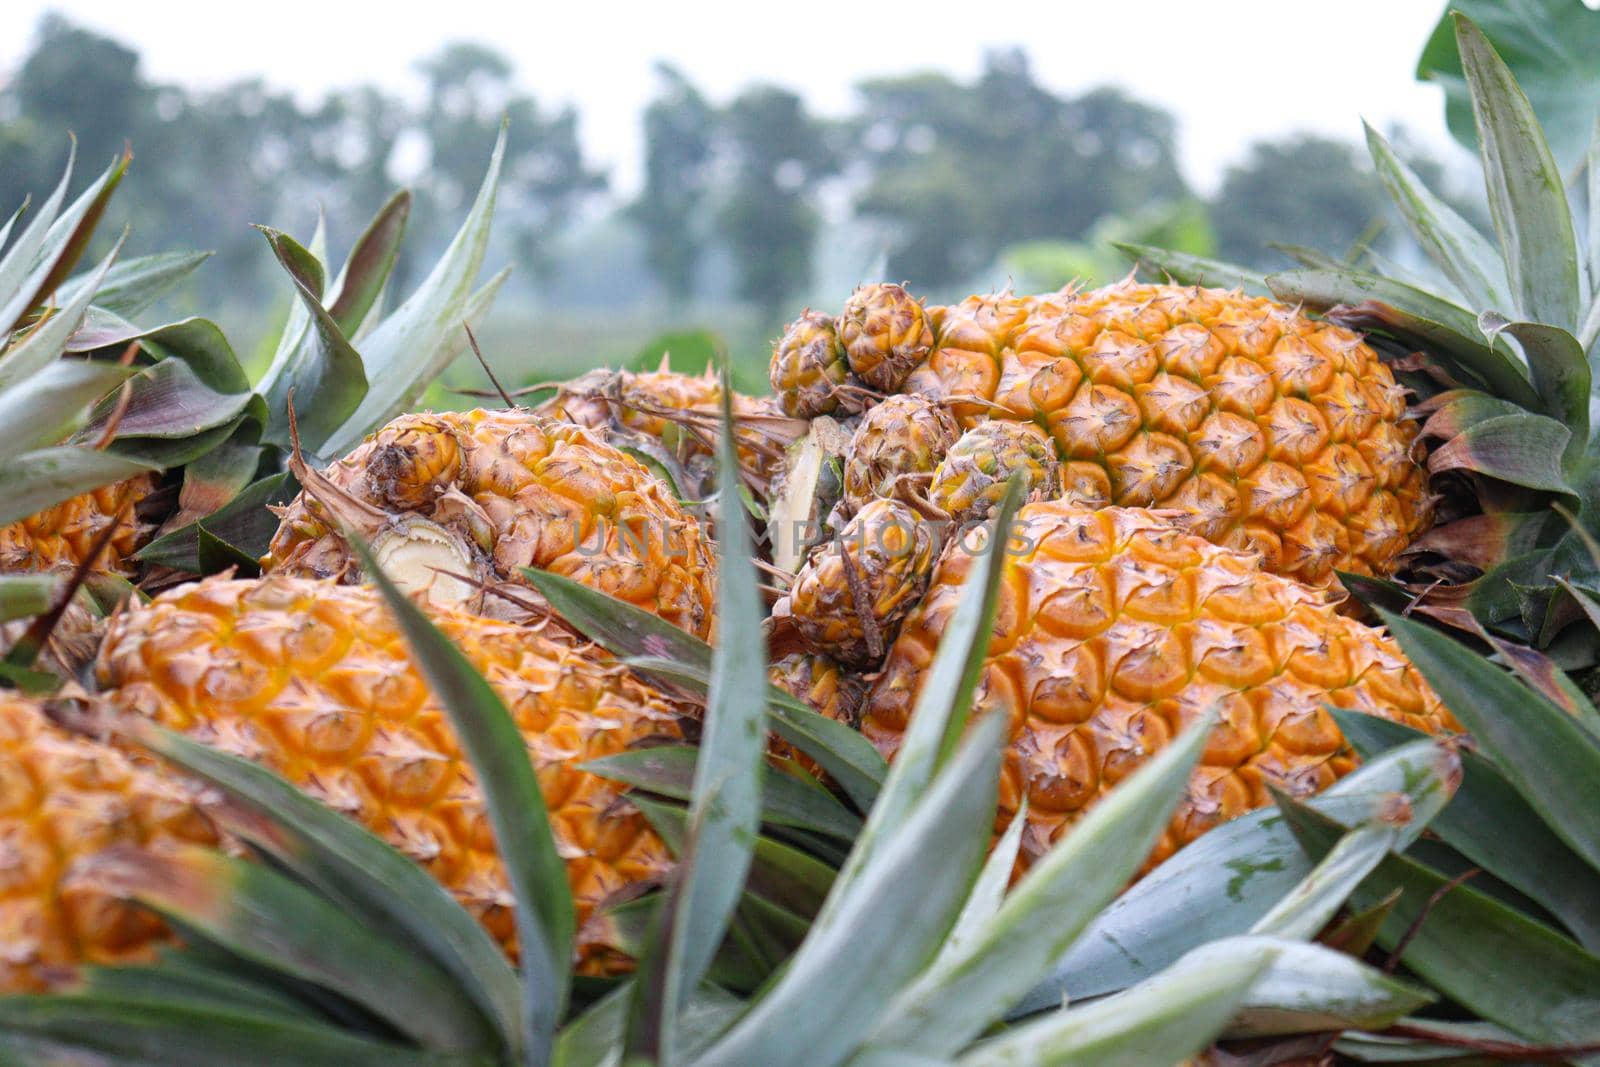 tasty and healthy ripe pineapple stock on farm for harvest